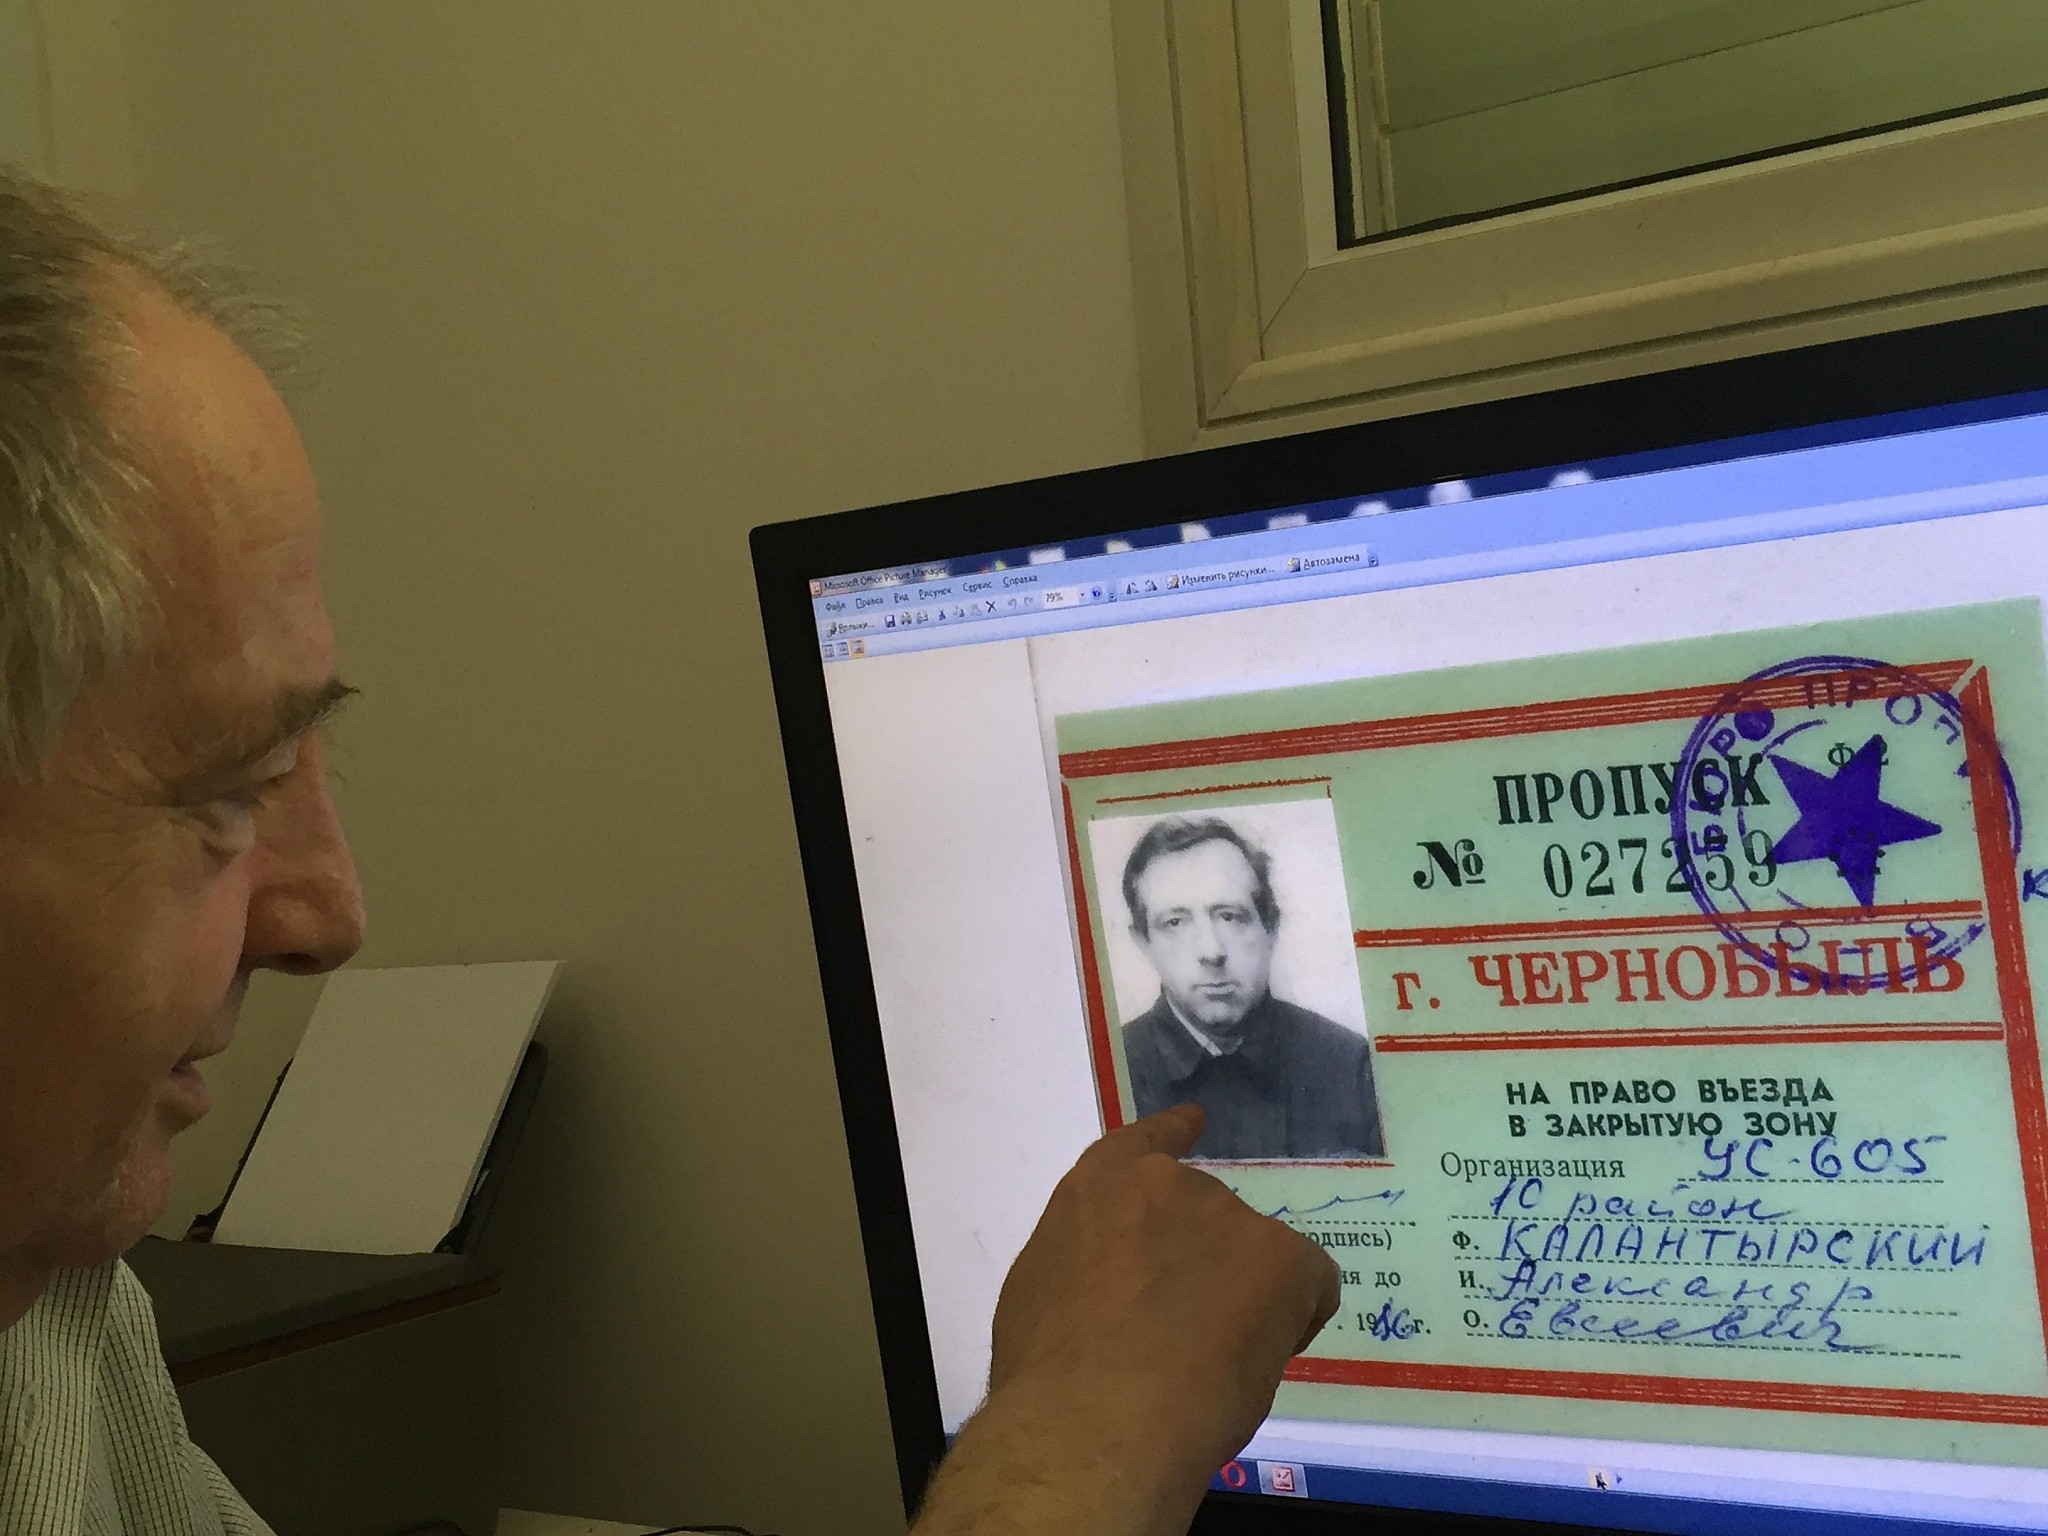 Chernobyl "liquidator" Alexander Kalentyrsky, a construction engineer who helped build the concrete base of the Chernobyl sarcophagus in 1986, at his home in Bat Yam, June 26, 2019. His computer shows documentation from his period working at Chernobyl. (ToI staff)